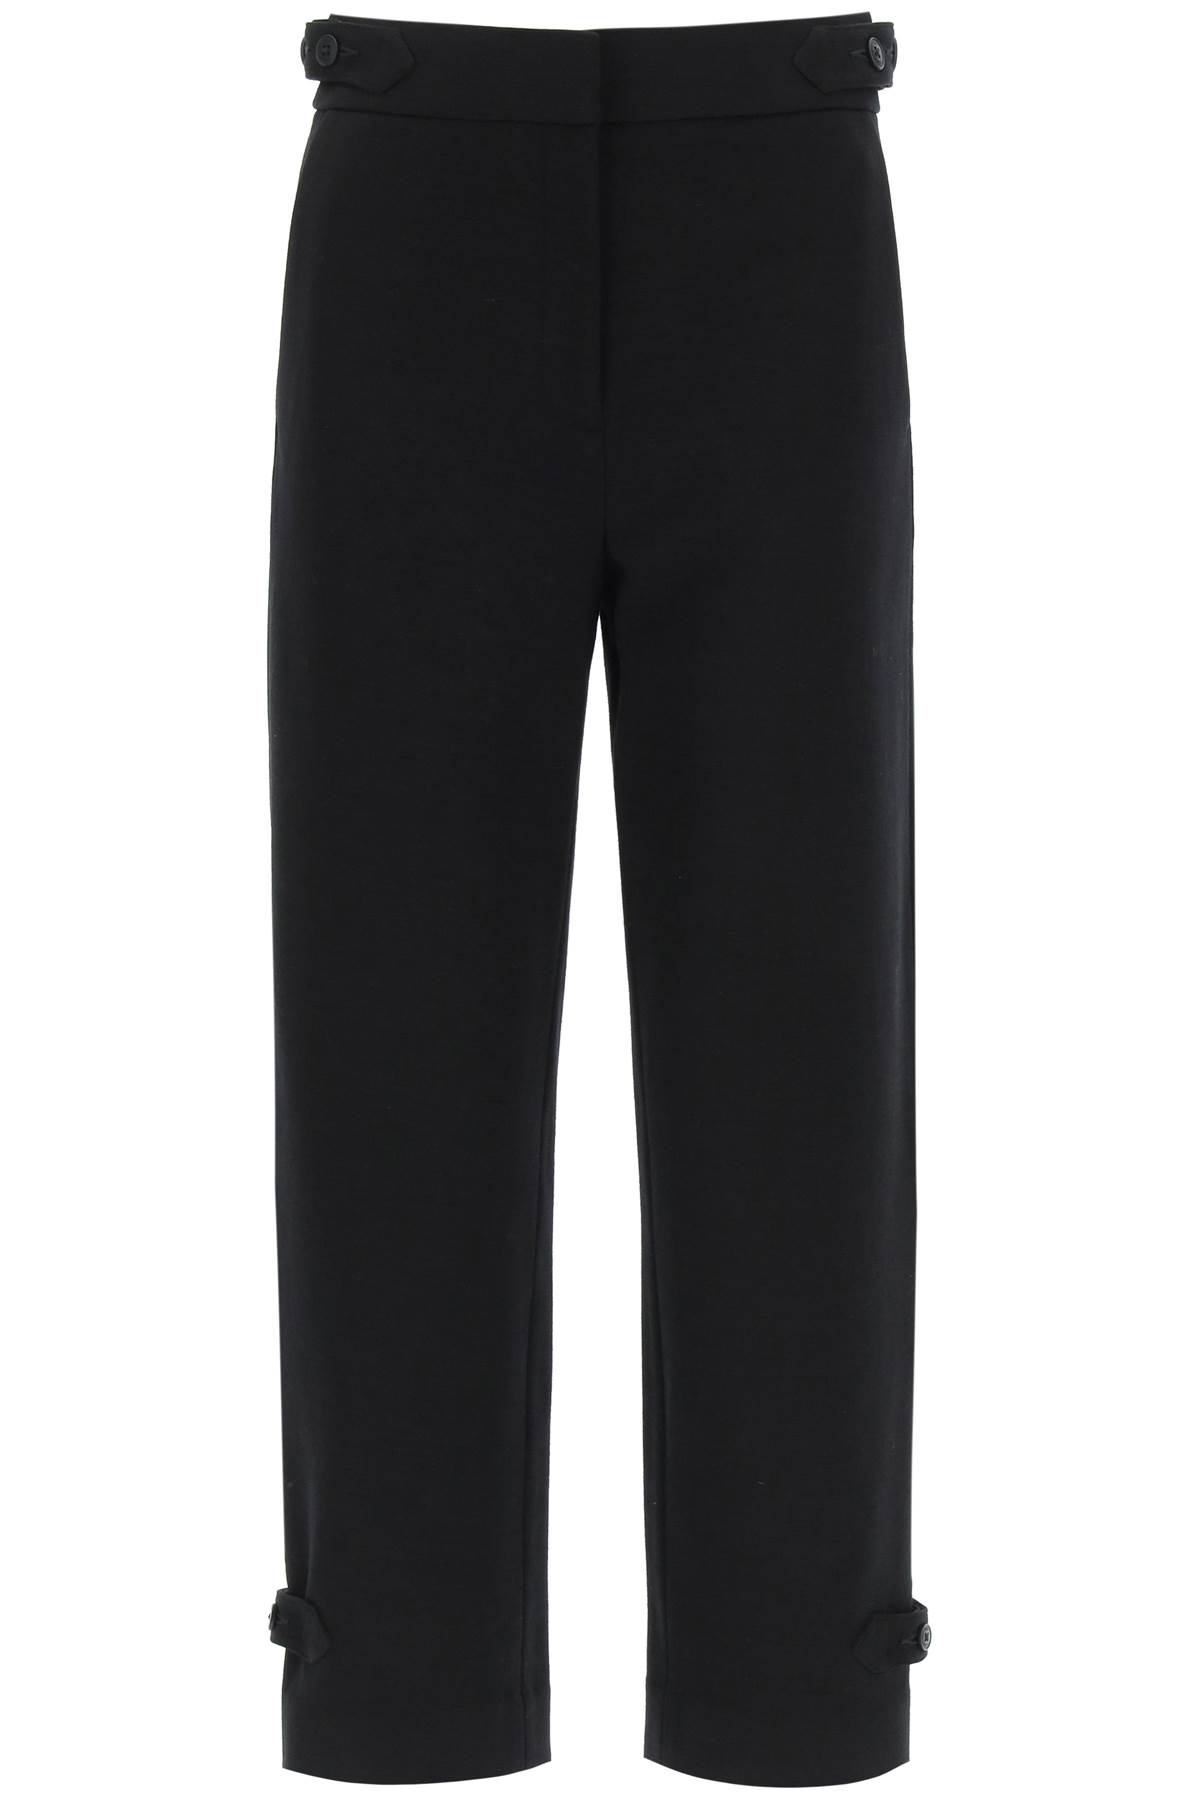 Tory Burch Knit Cargo Trousers